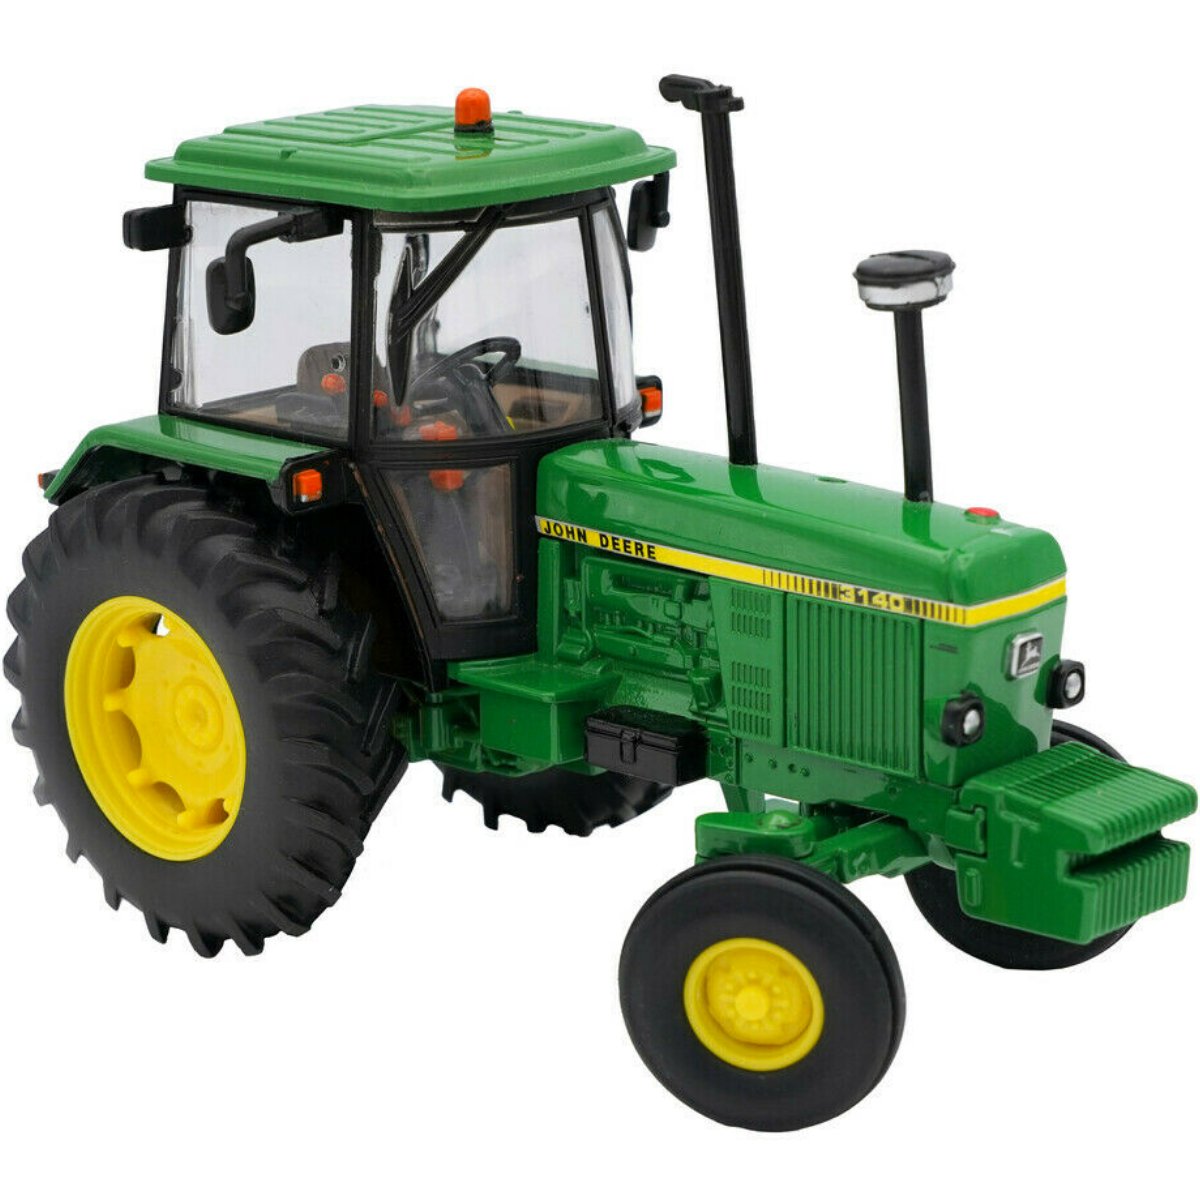 Britains John Deere 3140 Limited Edition Tractor - 1:32 Scale - Phillips Hobbies